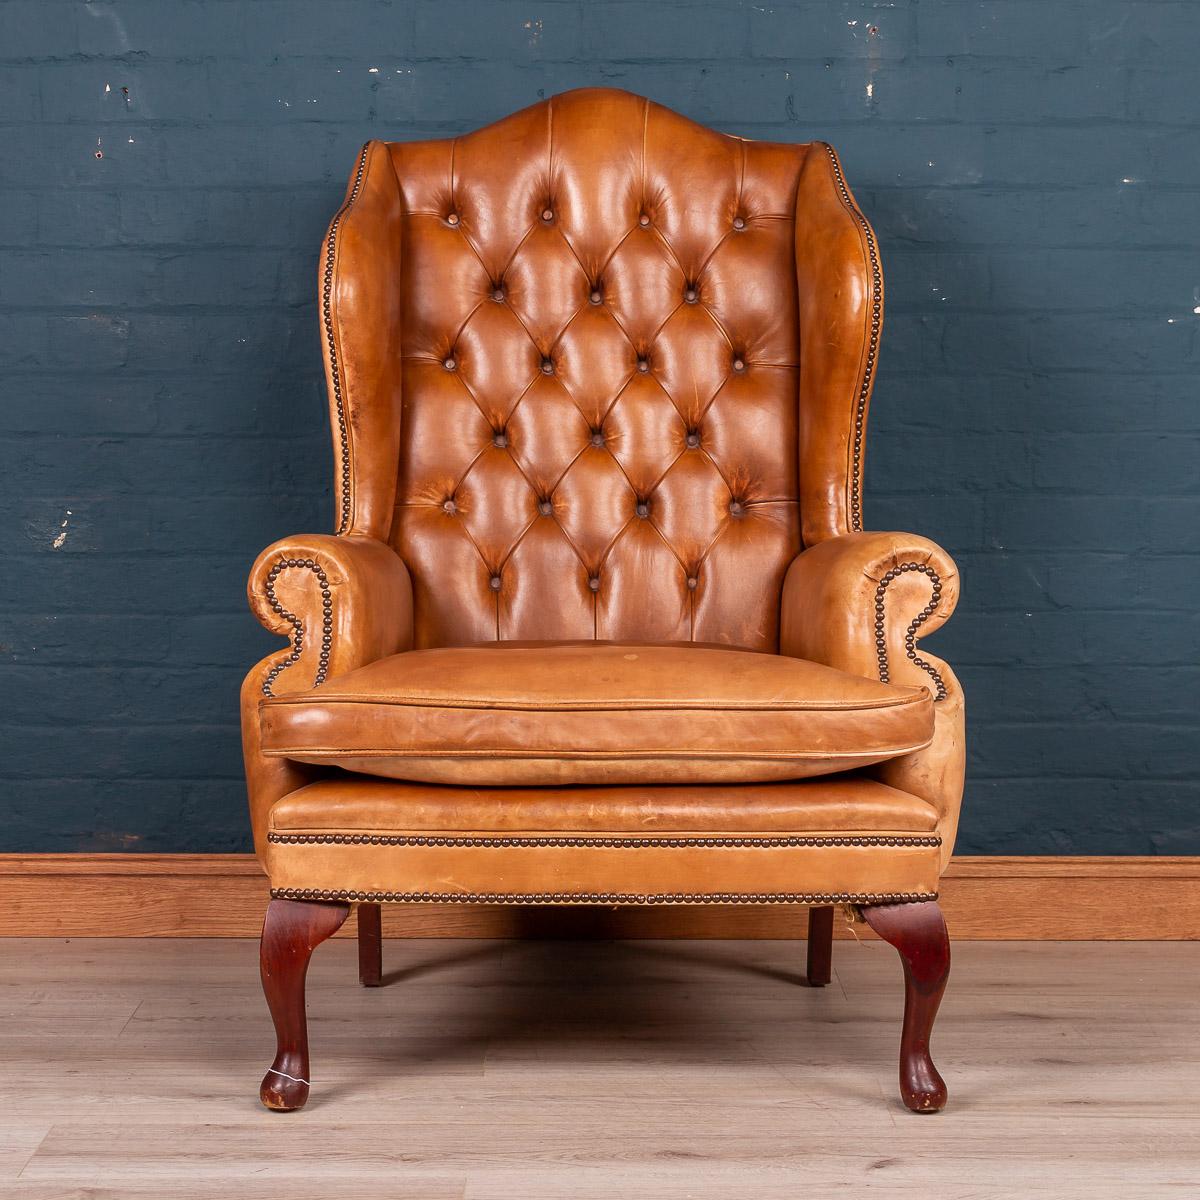 A lovely English wing back leather chair with button down backrest, late 20th century. Great patina, hand dyed leather.

Condition:
In good condition - wear and tear as expected, some fading to the leather.

Size:
Height: 120cm
Width: